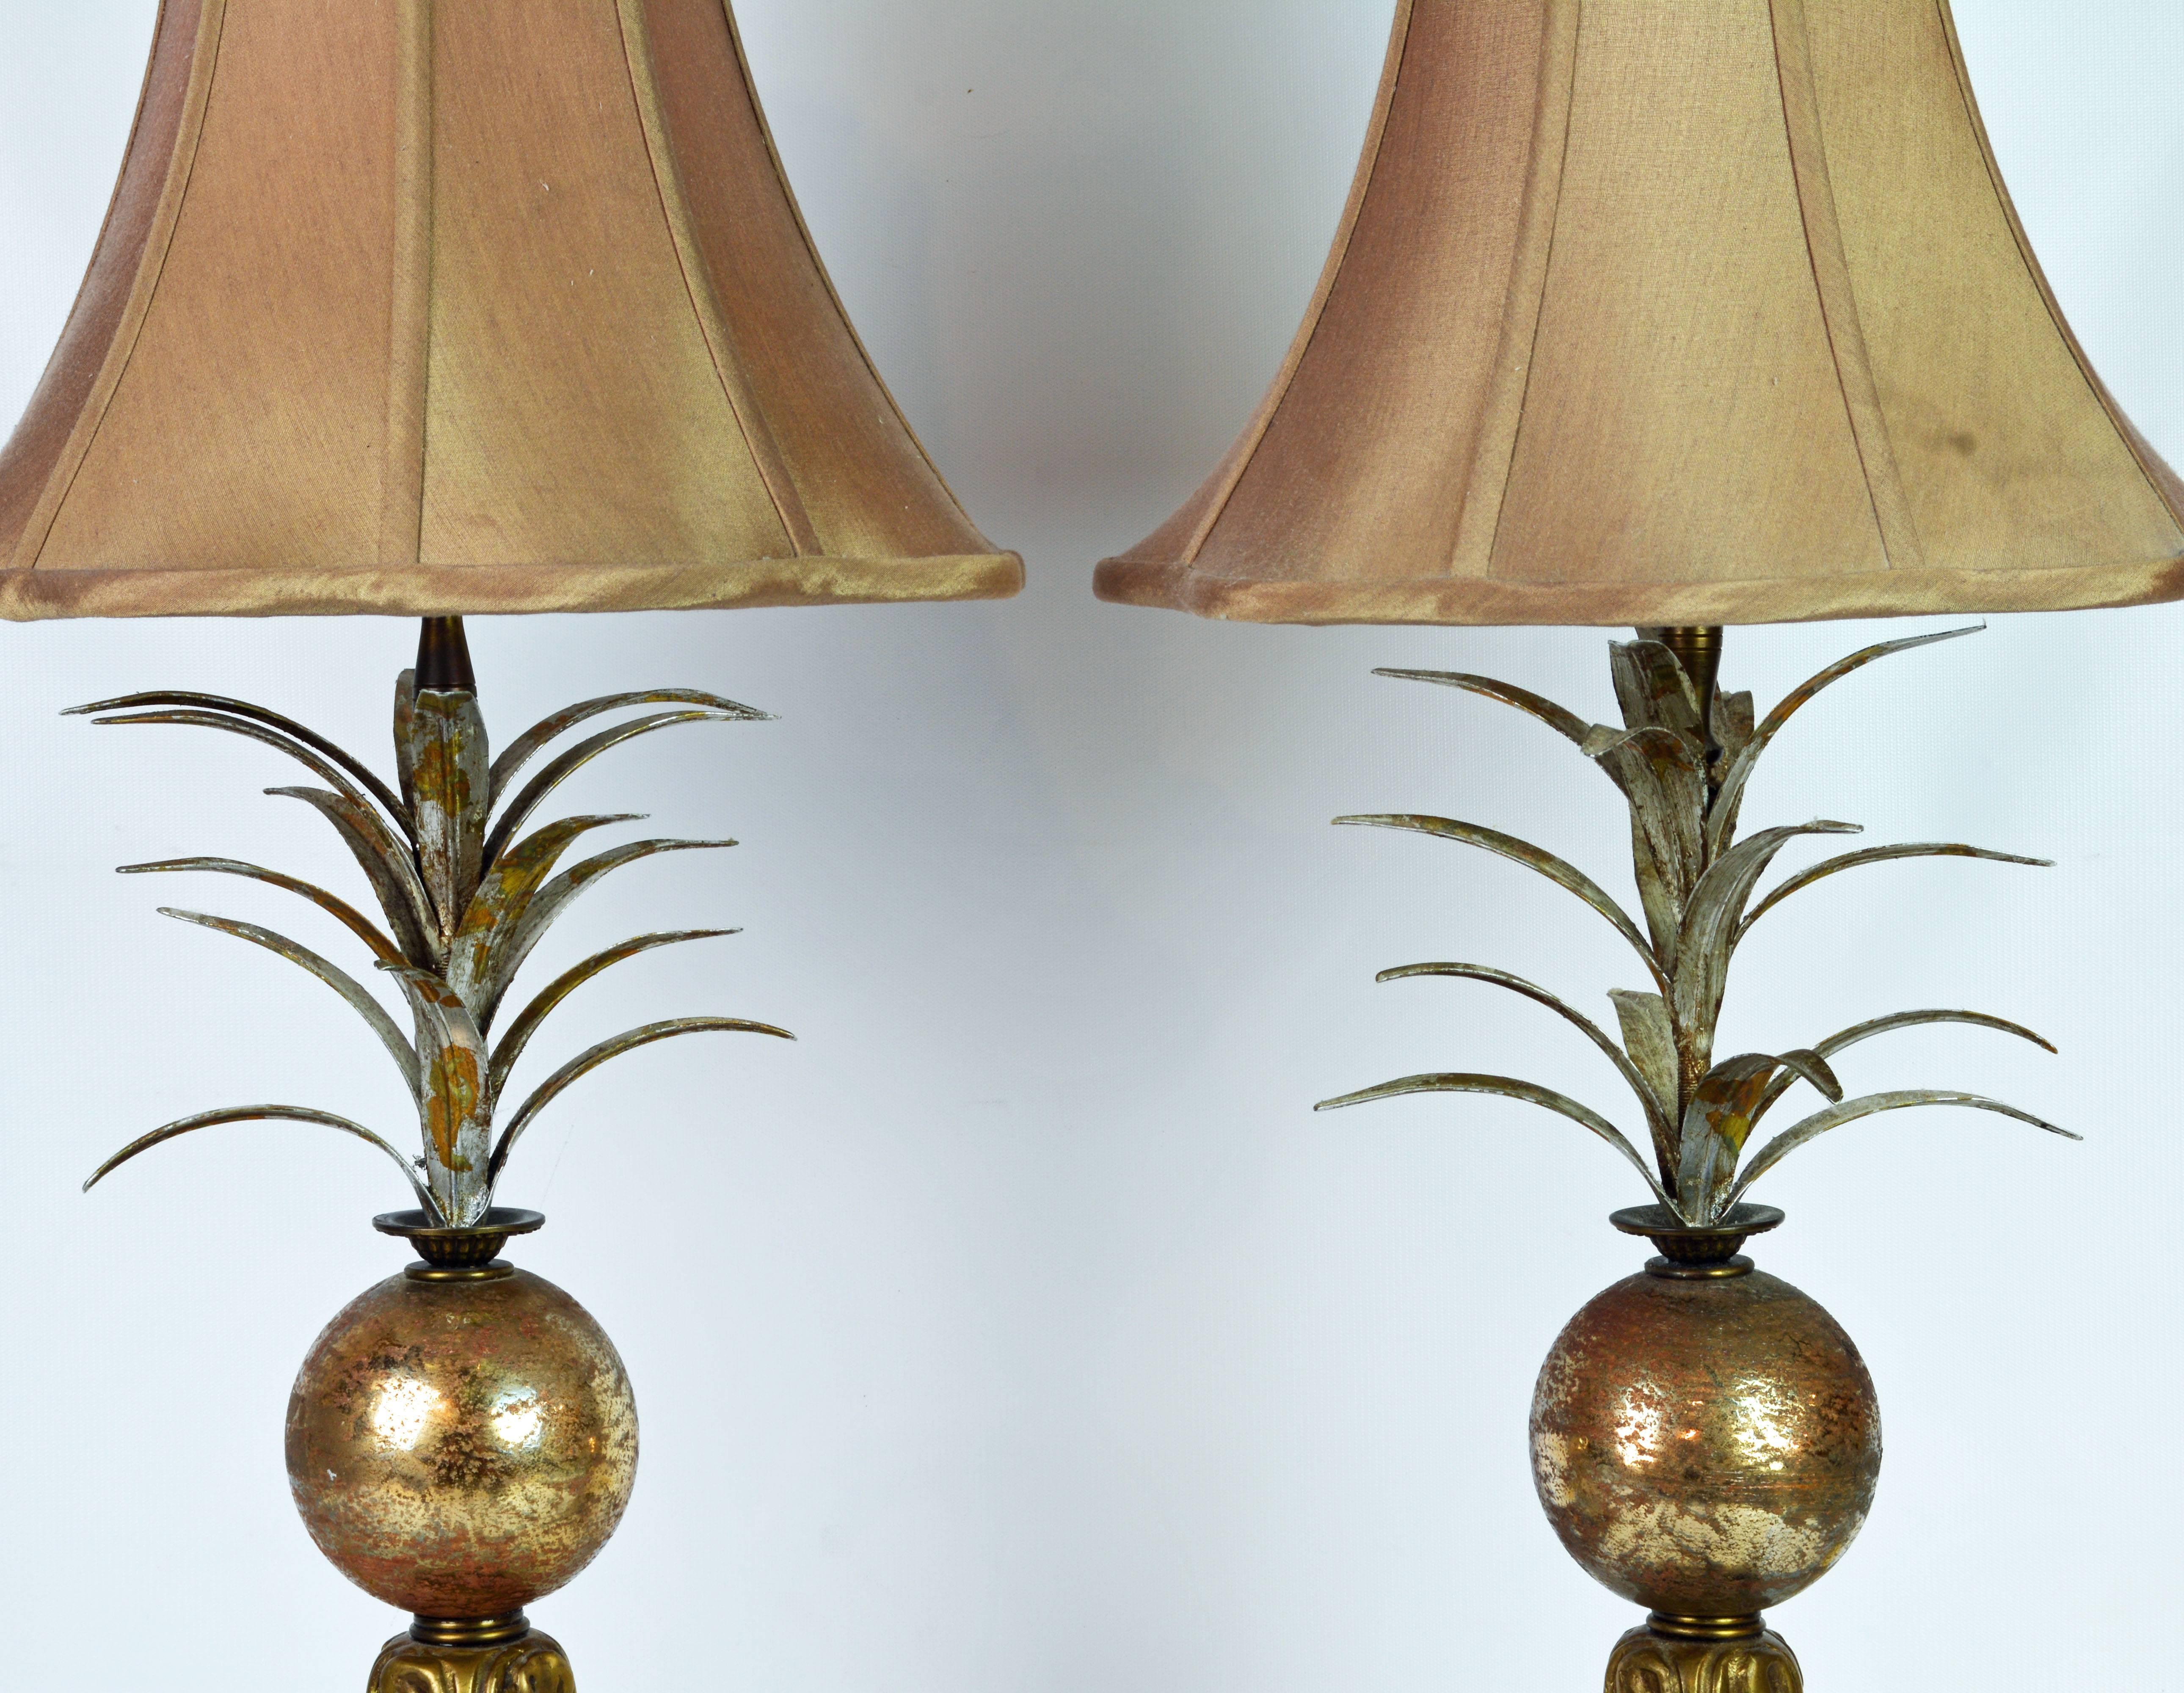 These lamps are early John Richard lamps featuring original shades above a gilt globe holding a frond of likely pineapple leaves and resting on bronze feet standing on bases made of Lucite and distressed giltwood.